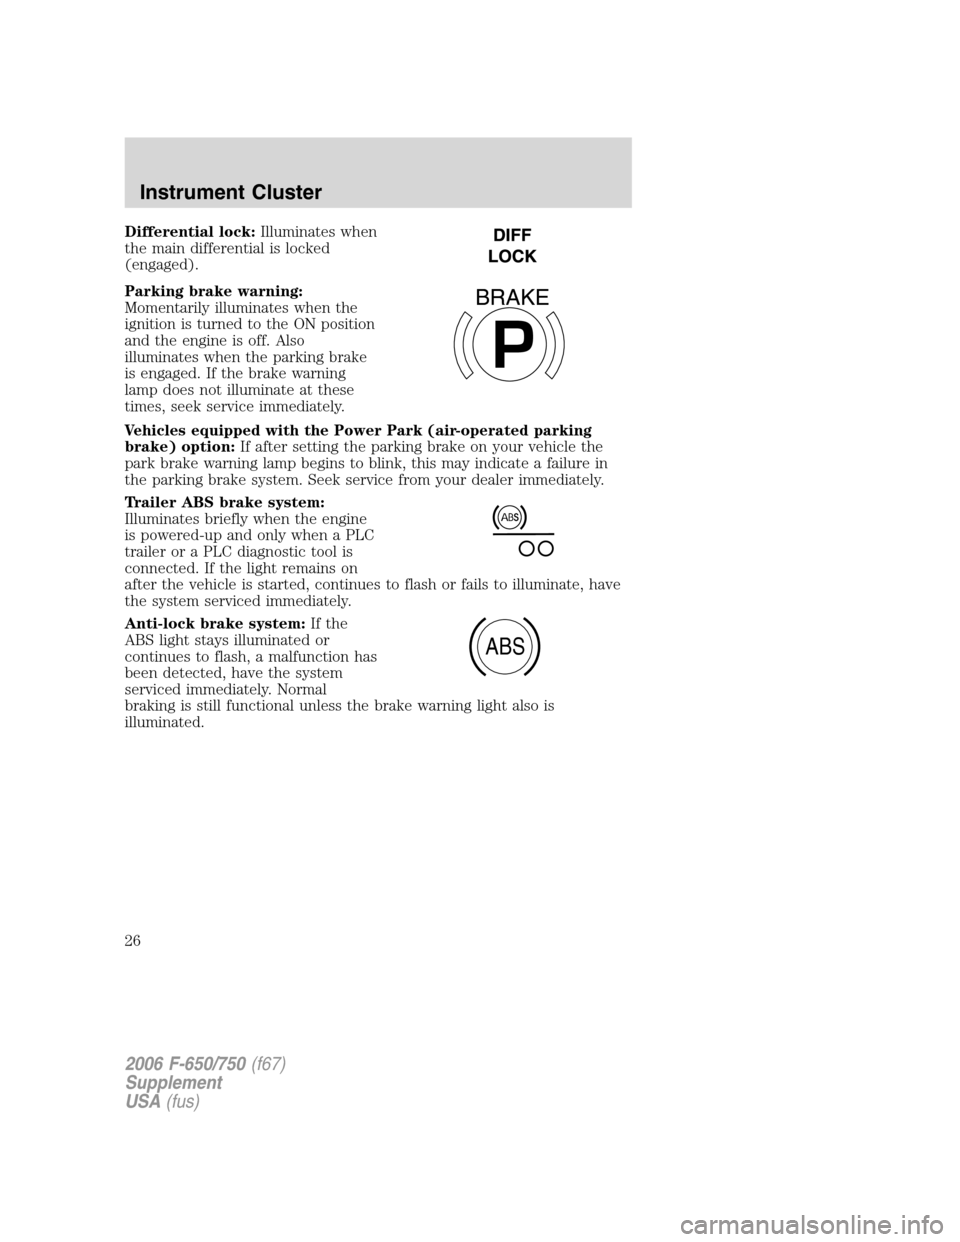 FORD F750 2006 11.G Owners Manual Differential lock:Illuminates when
the main differential is locked
(engaged).
Parking brake warning:
Momentarily illuminates when the
ignition is turned to the ON position
and the engine is off. Also
